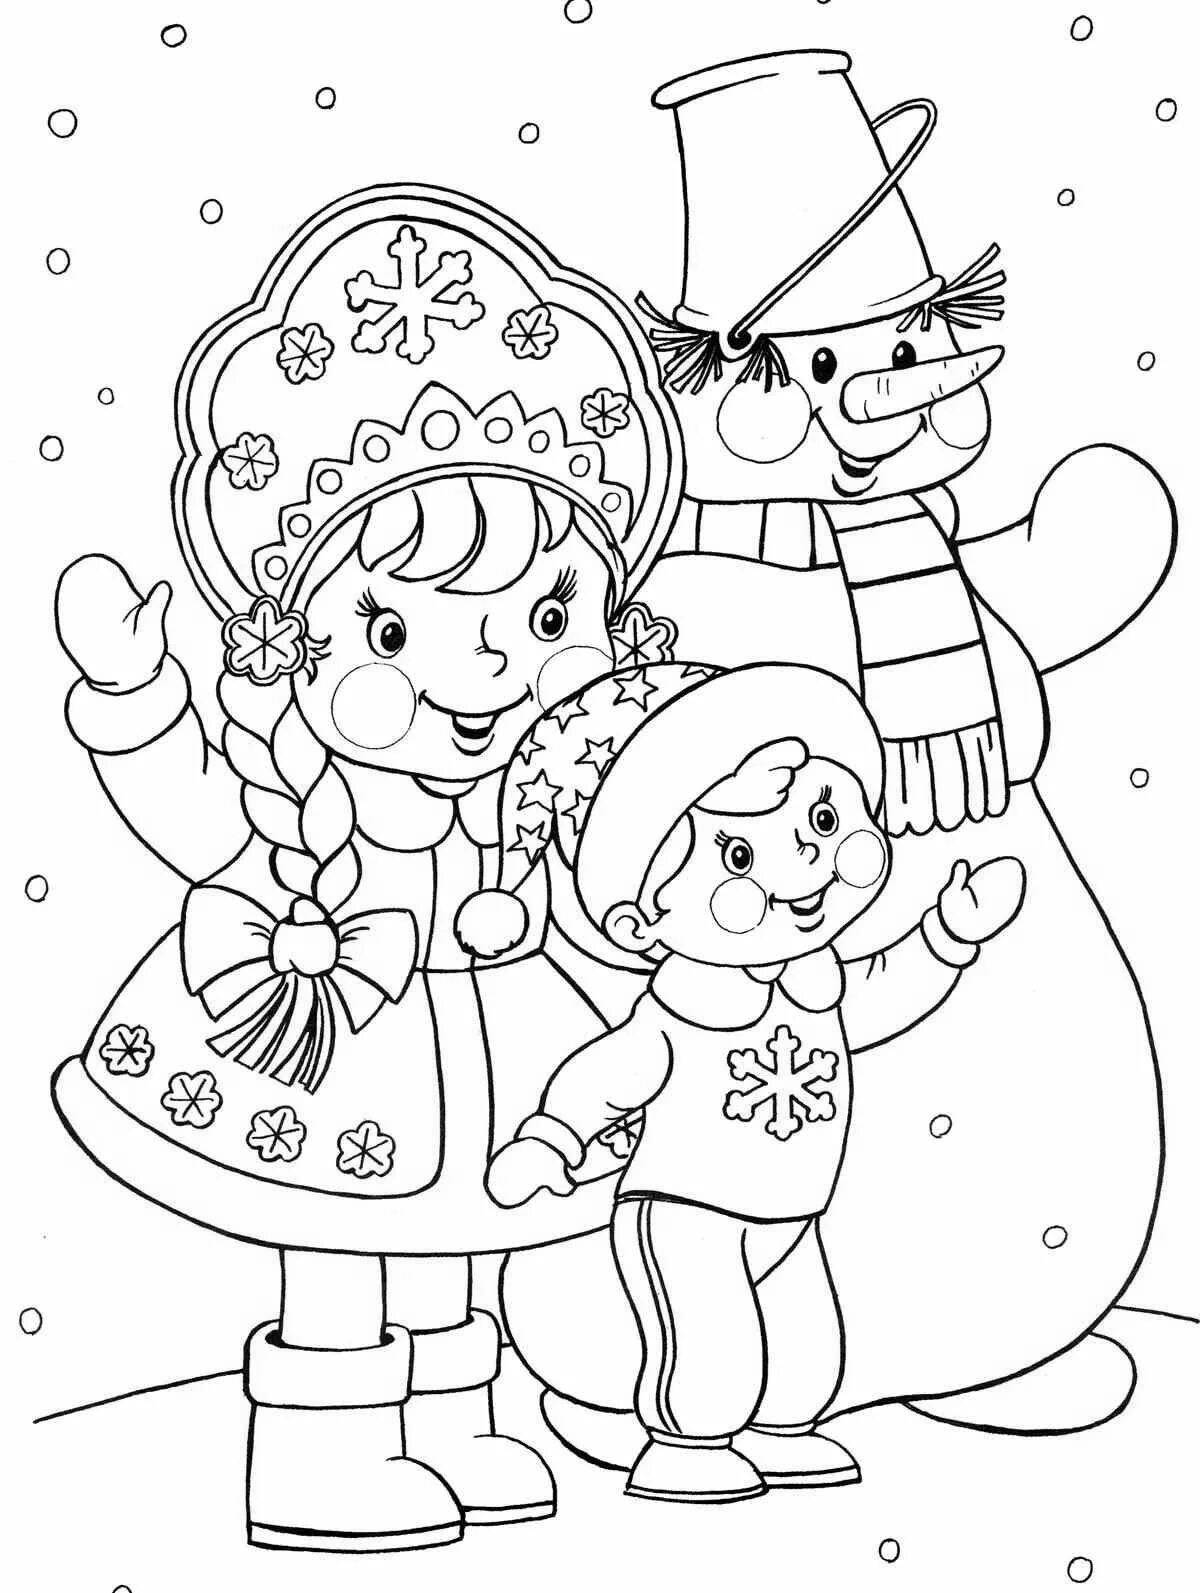 Great Christmas coloring book for 8-9 year olds